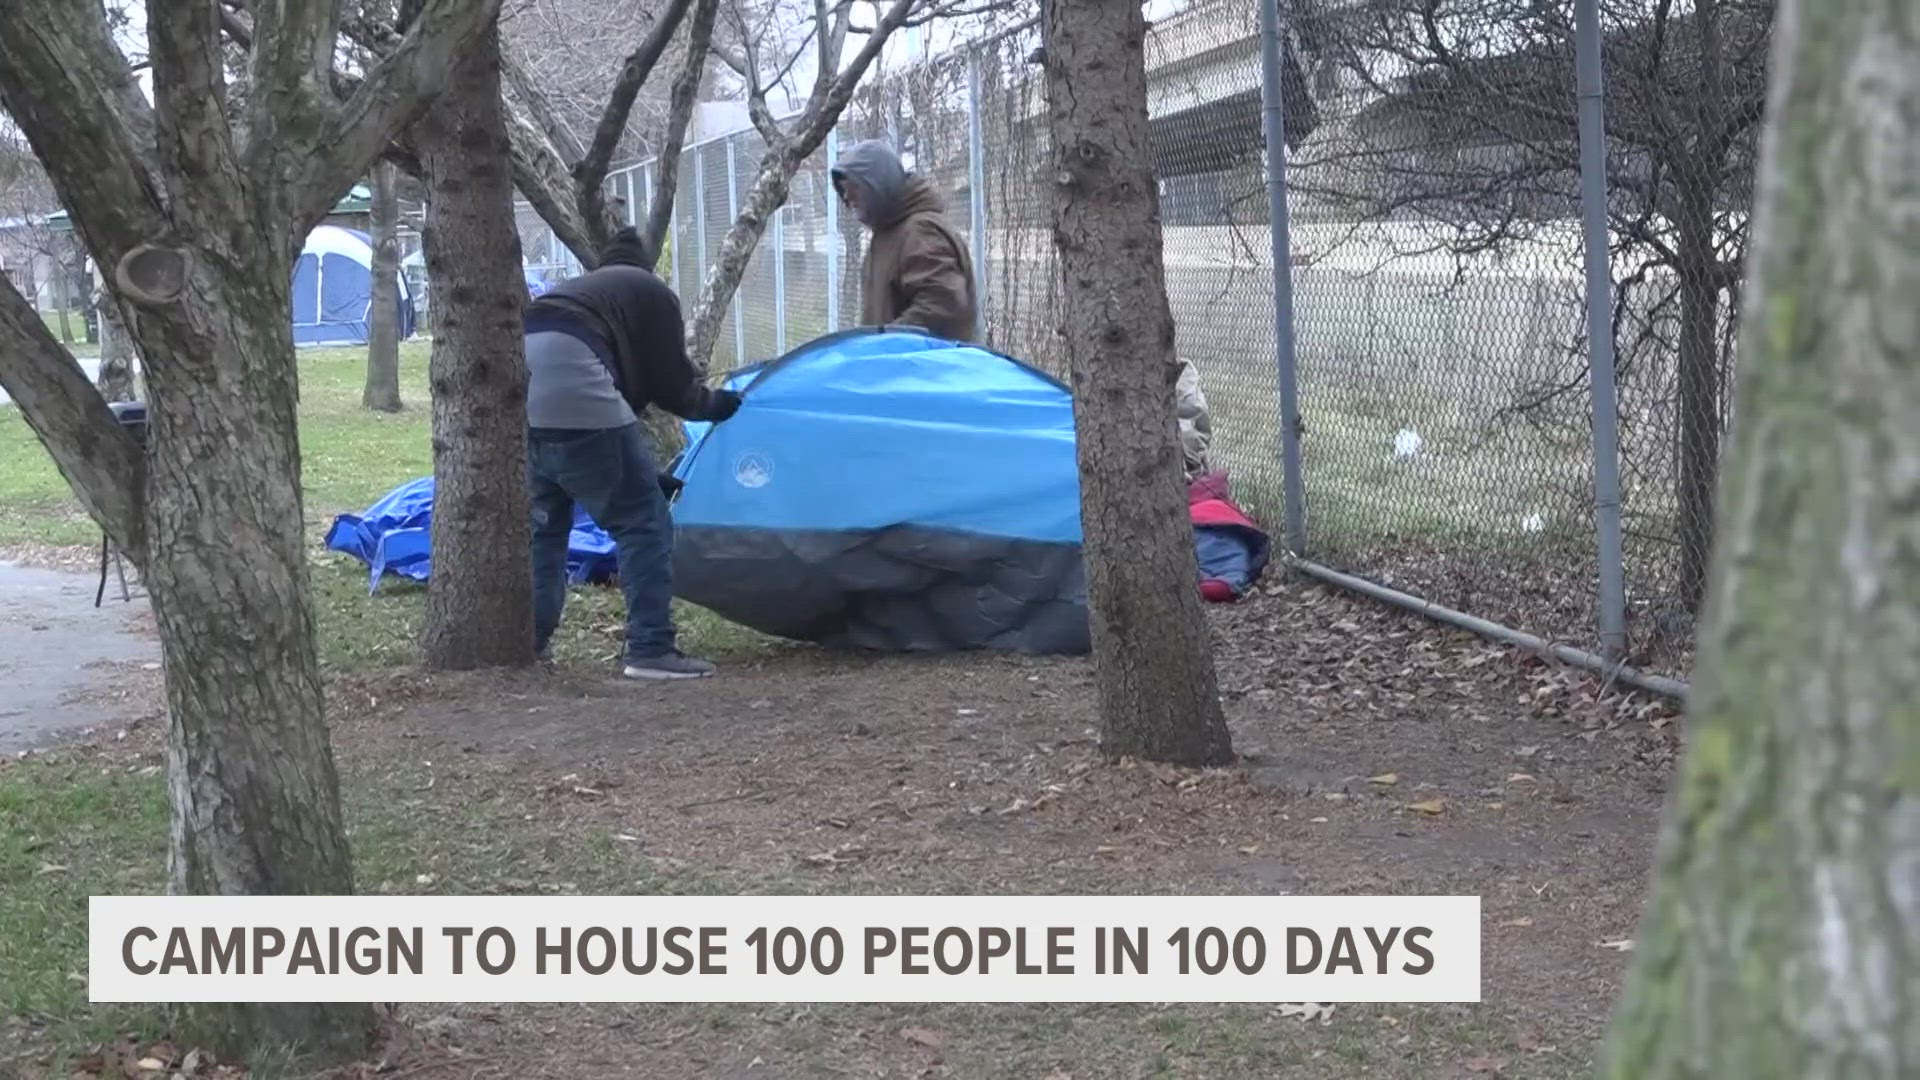 The goal is to find permanent housing solutions for 100 people in 100 days. Organizers hope to begin moving people into housing this September.